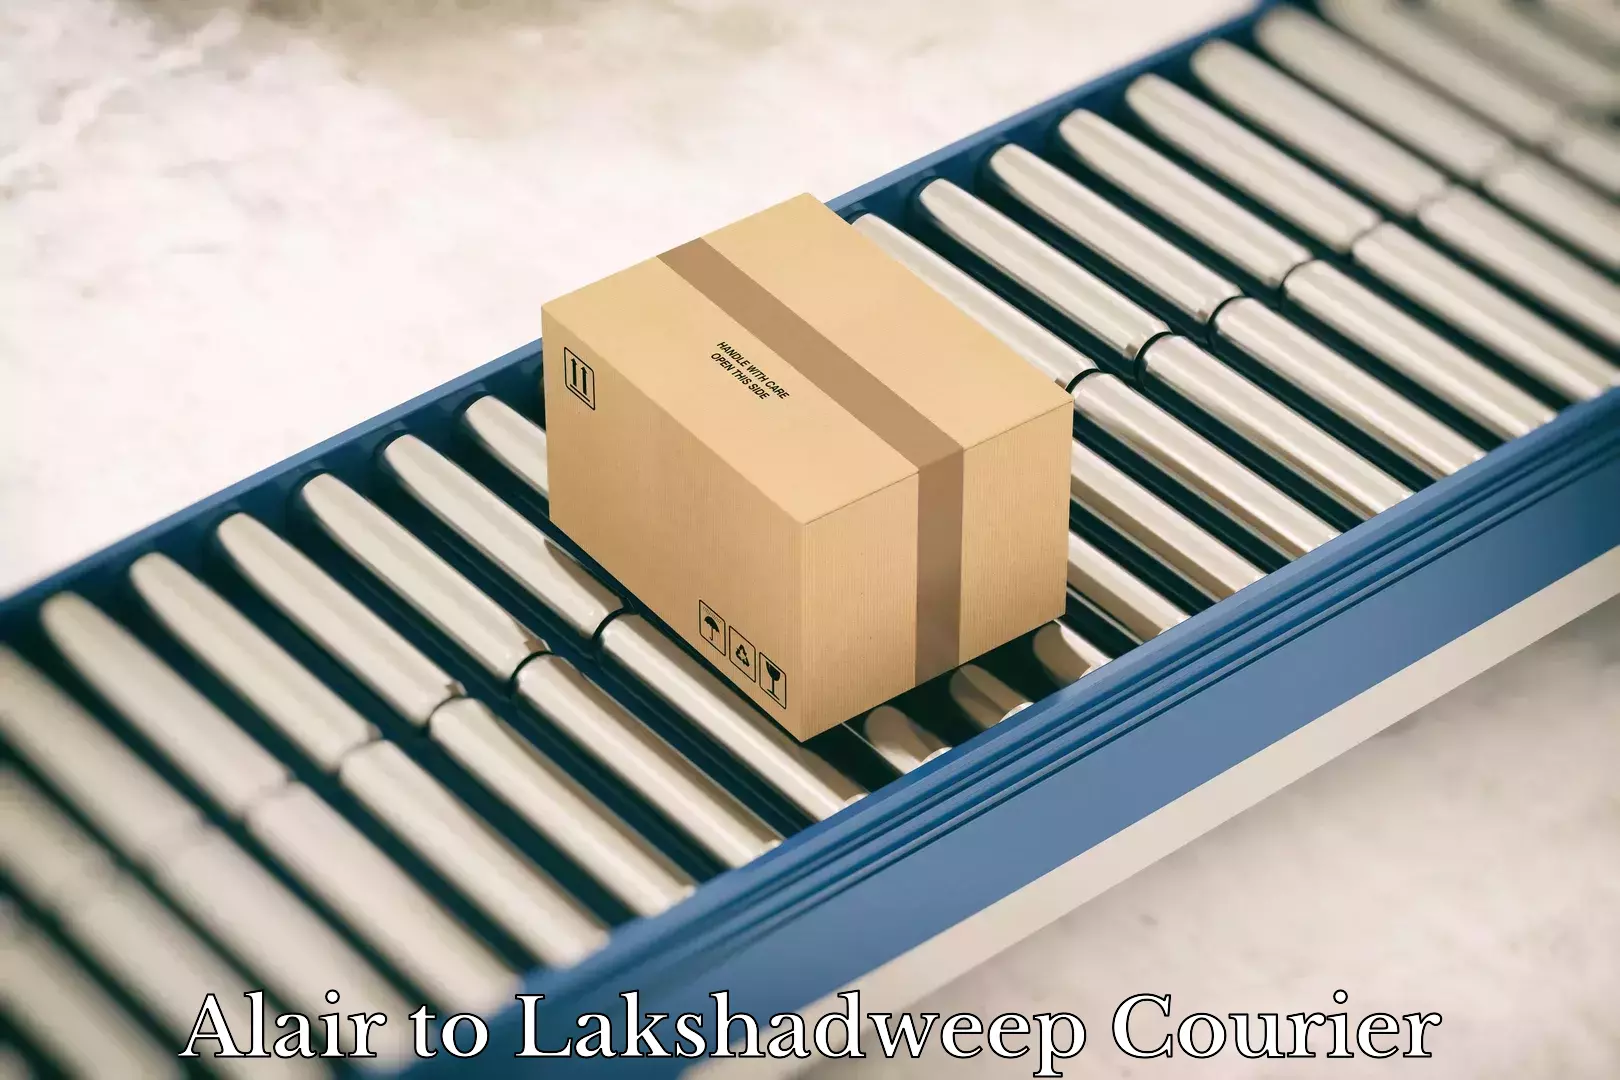 Round-the-clock parcel delivery Alair to Lakshadweep